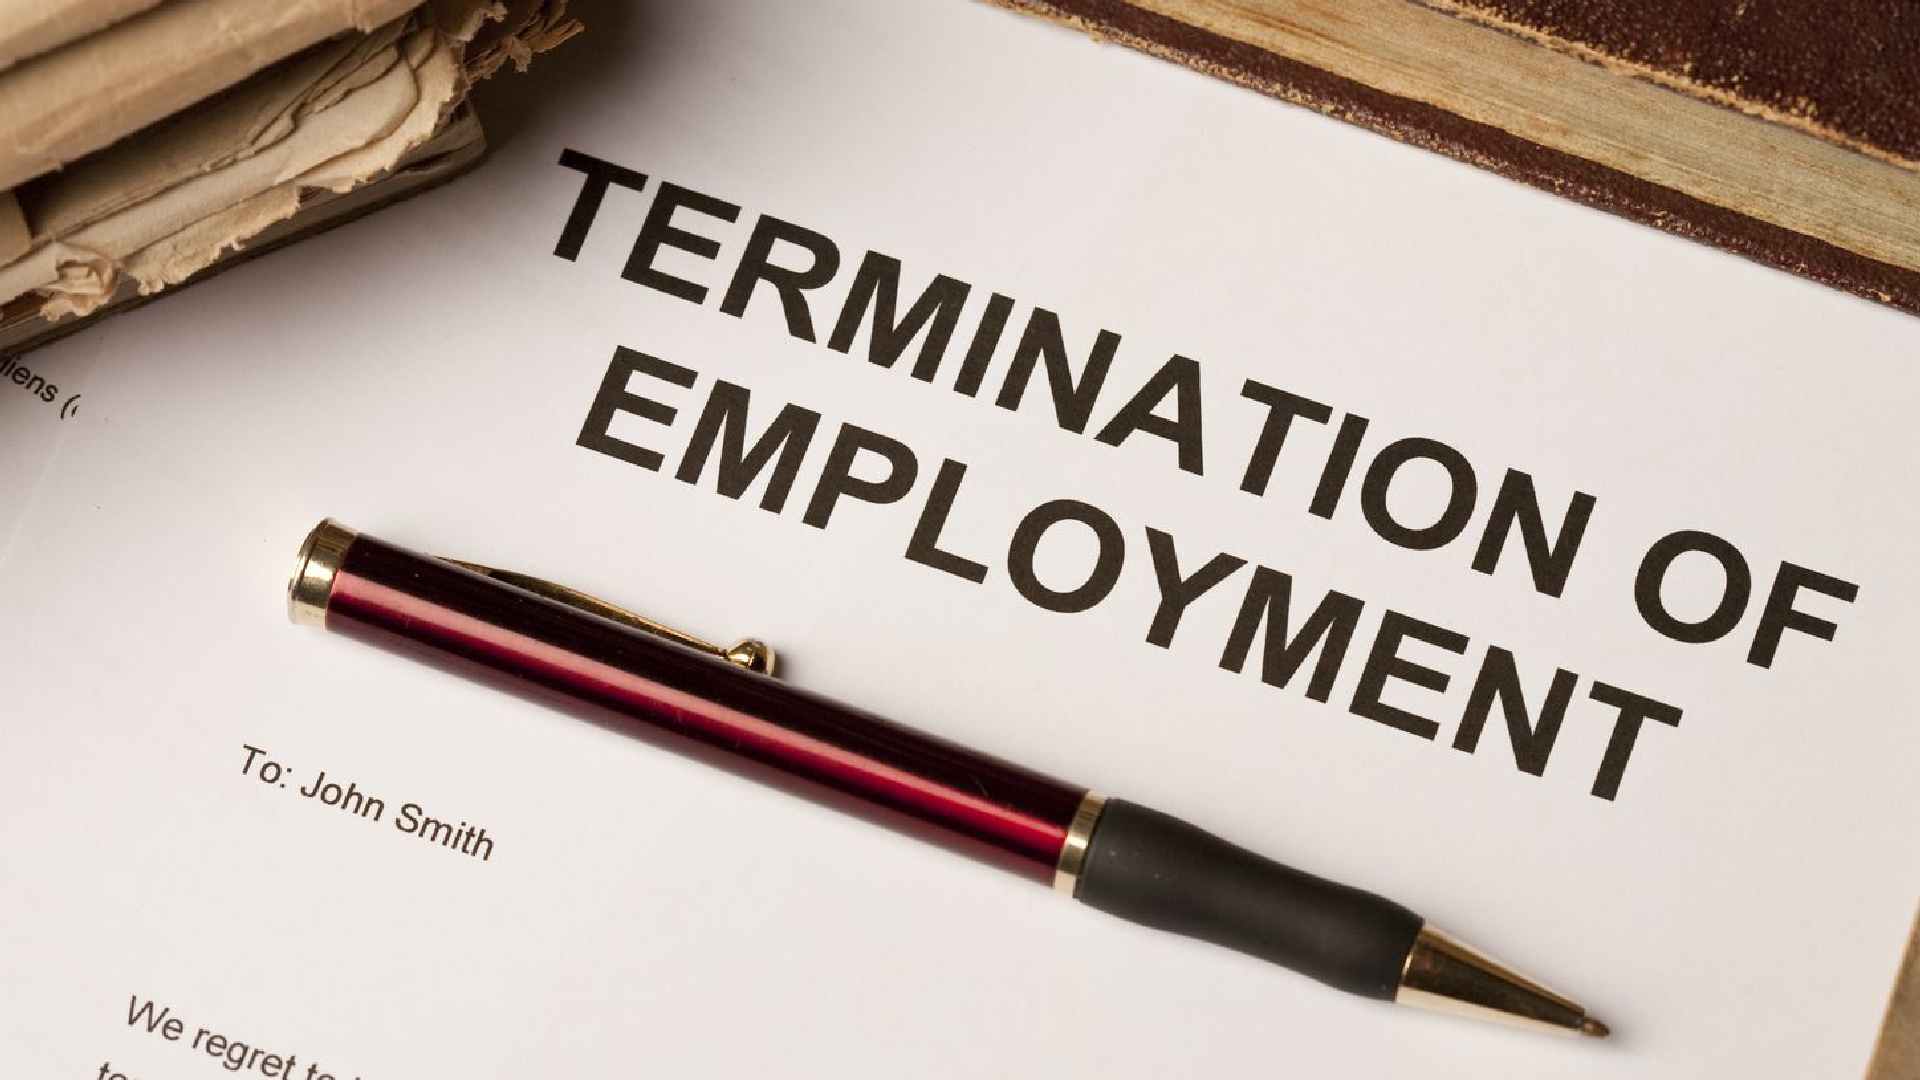 Find information about termination of employment in UAE